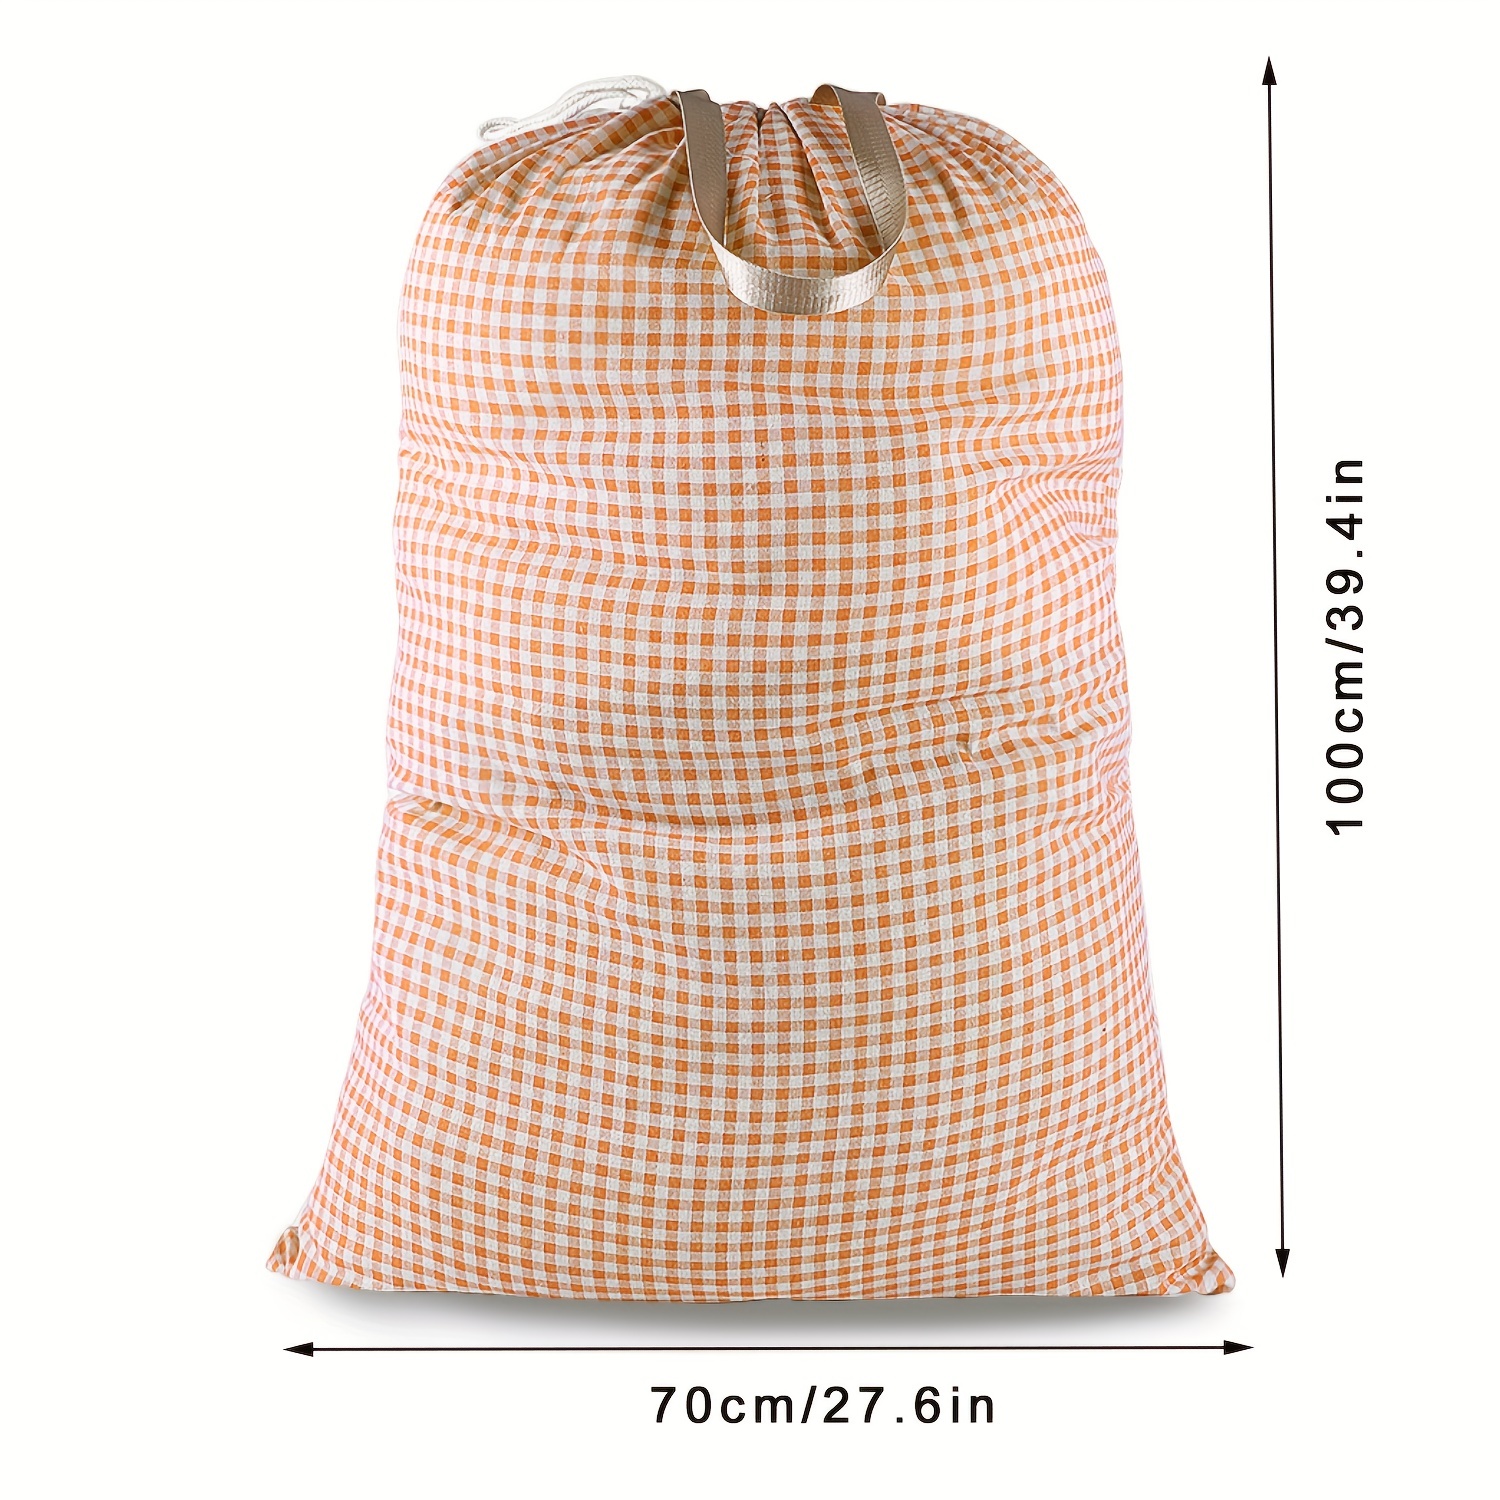 Cotton Laundry Bag - The Extra Heavy Duty Washable Laundry Bag with  Drawstring Makes a Great Cloth Storage Sack for Sleeping Bag, Linen Basket  Liner, Hamper Liner and Travel. (2-Pack) : 